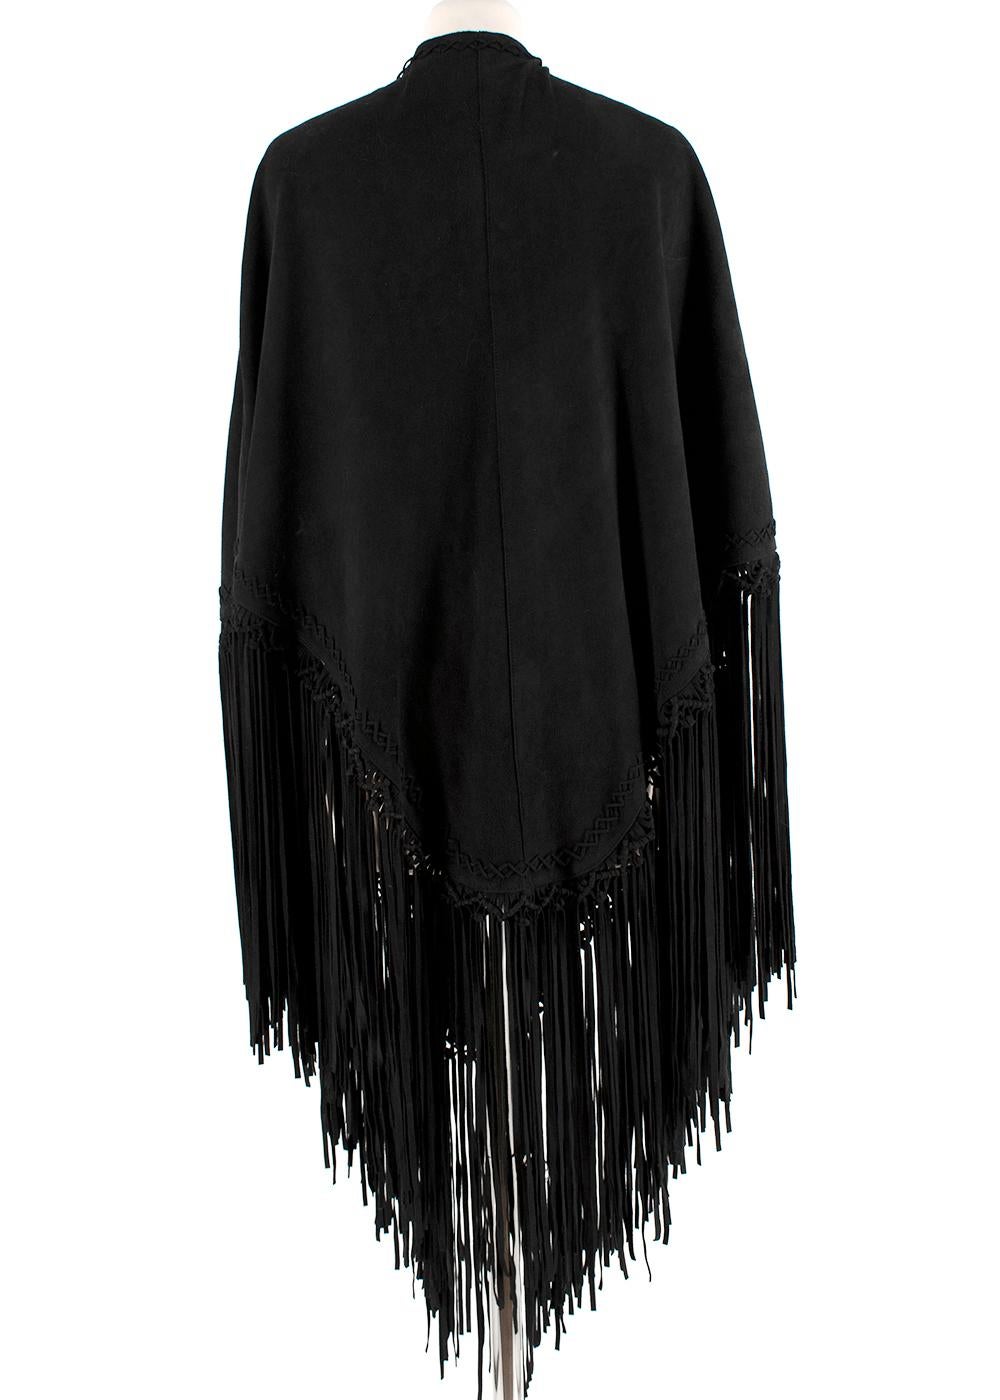 Women's or Men's Talitha Black Suede Fringed Shawl S/M